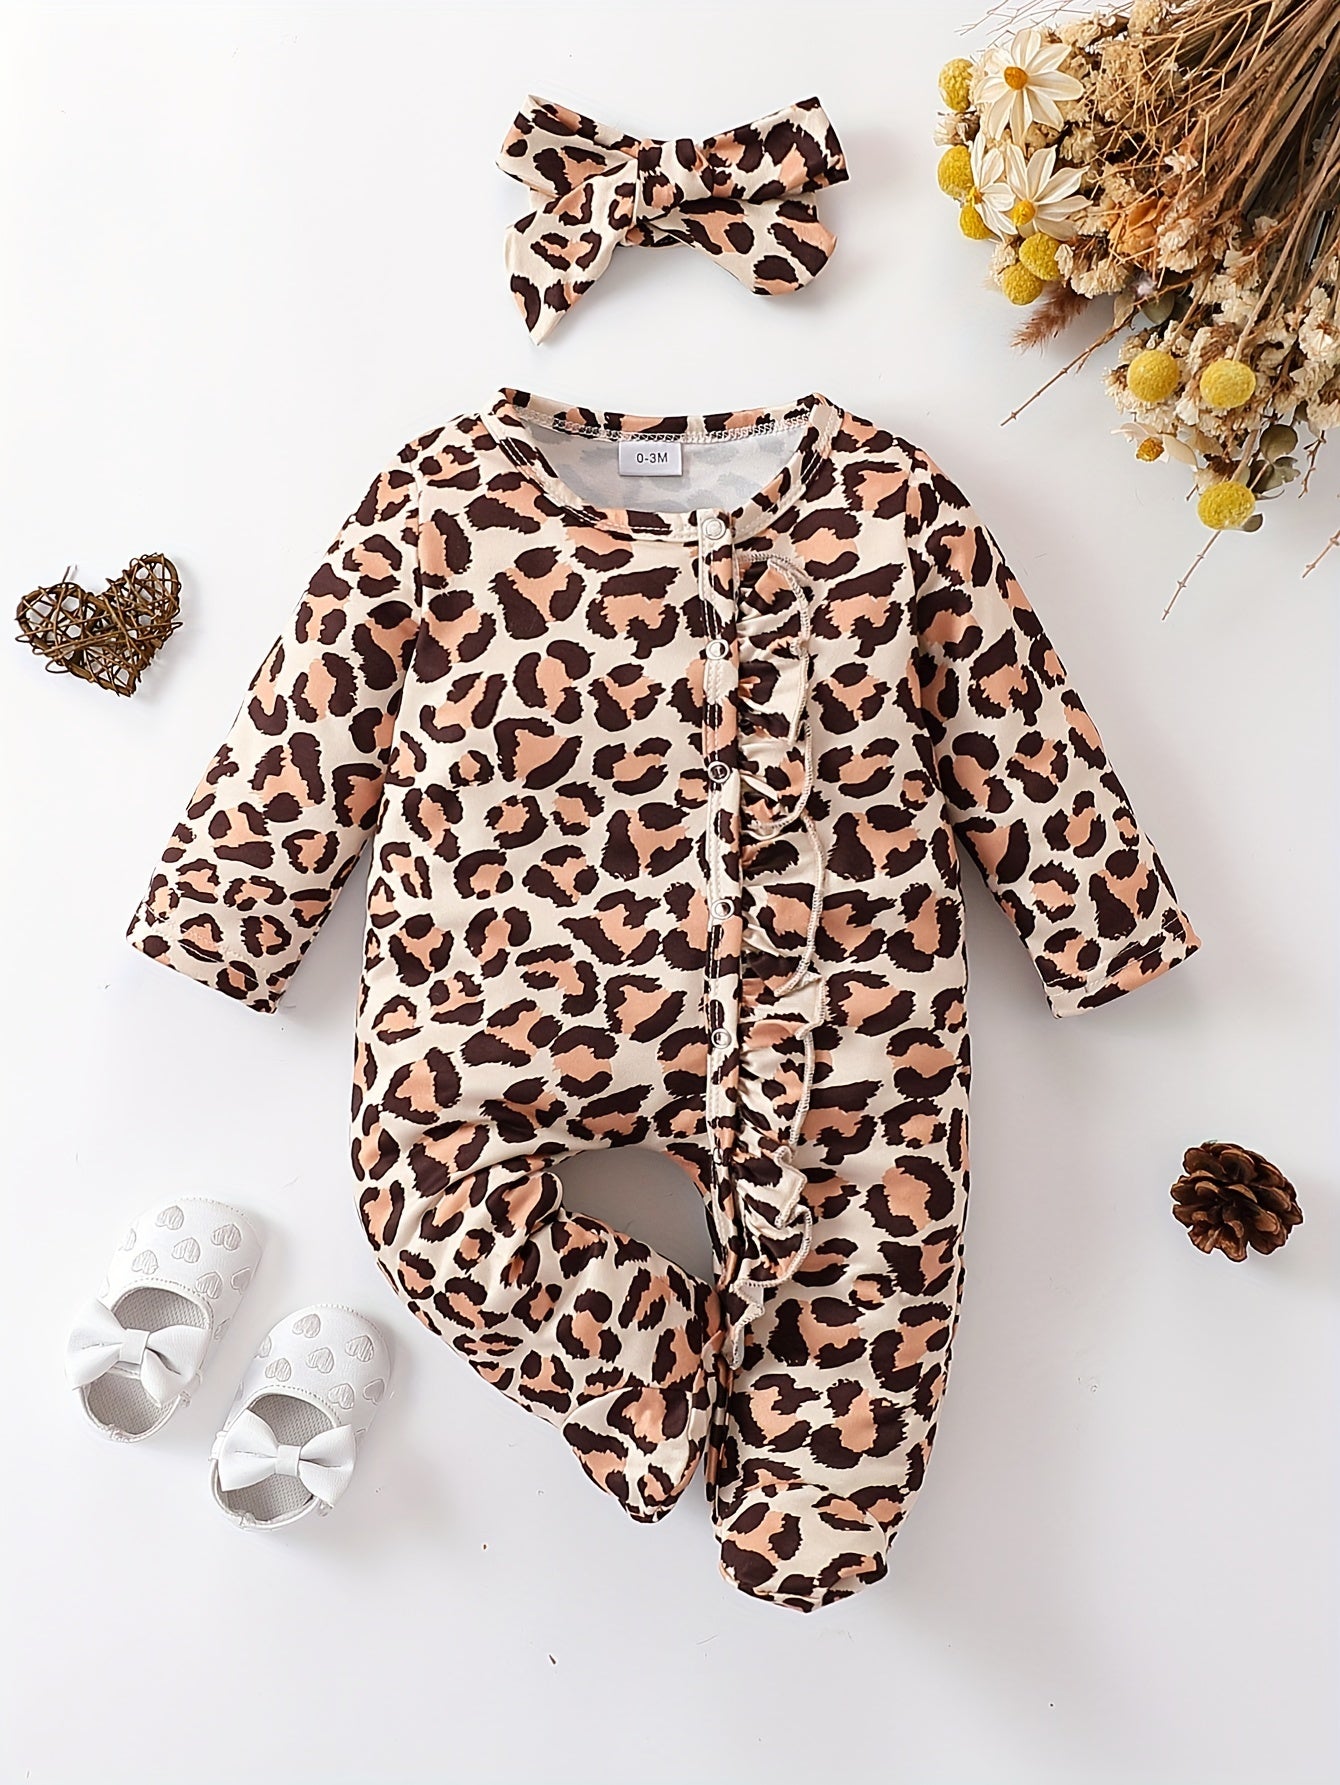 Infant Girl Cute Floral Romper & Jumpsuit - Long Sleeve Onesie Baby Clothes